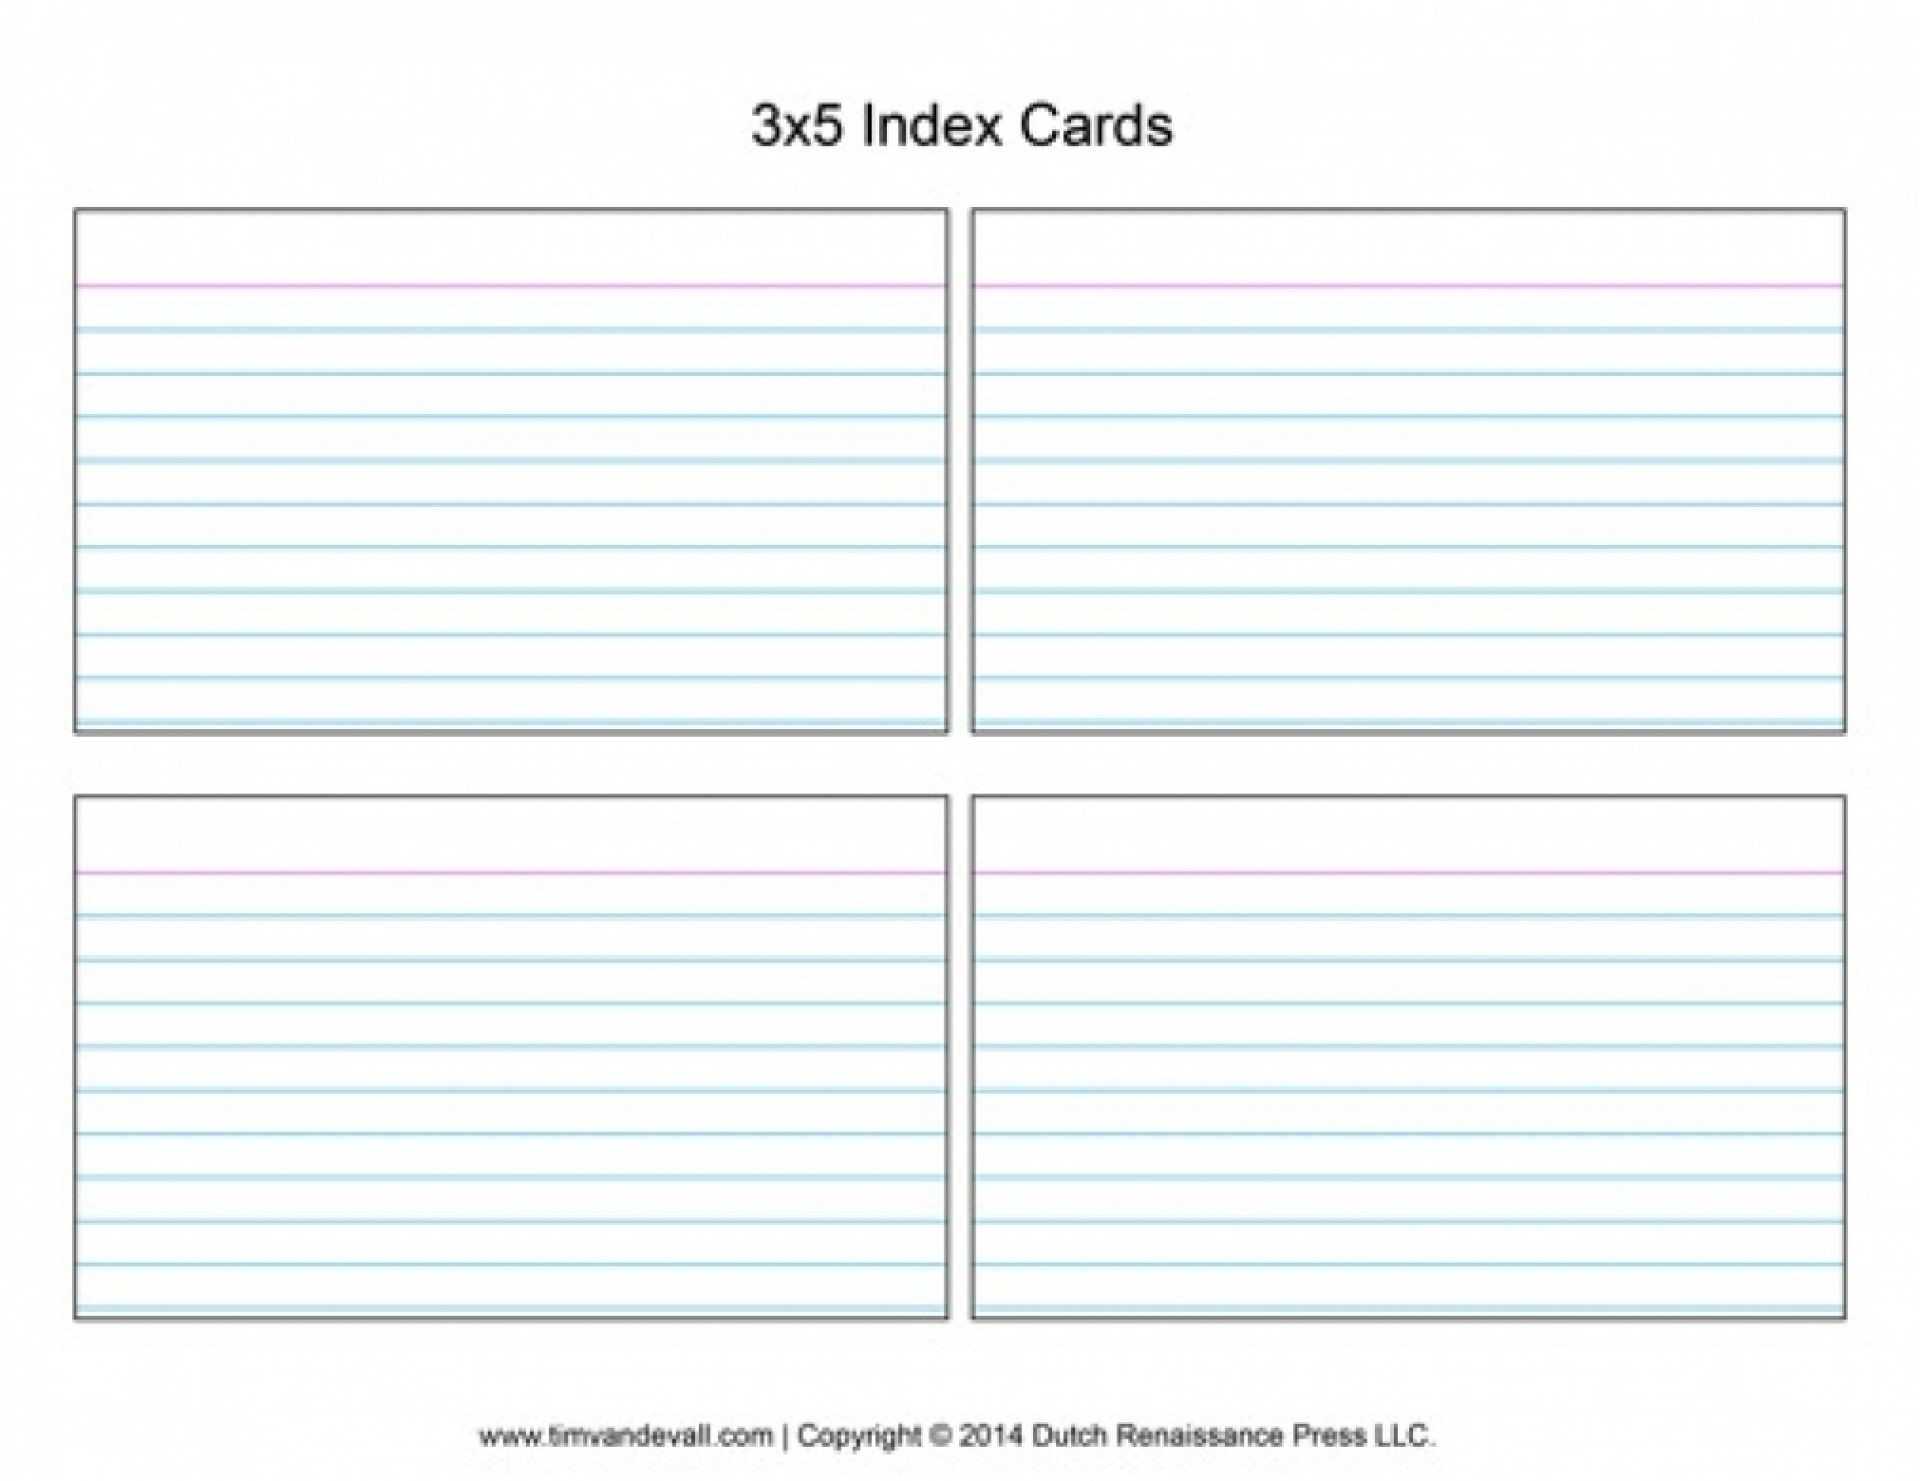 004 Best 5X8 Index Card Template Free In Word For Surprising Inside 3X5 Blank Index Card Template